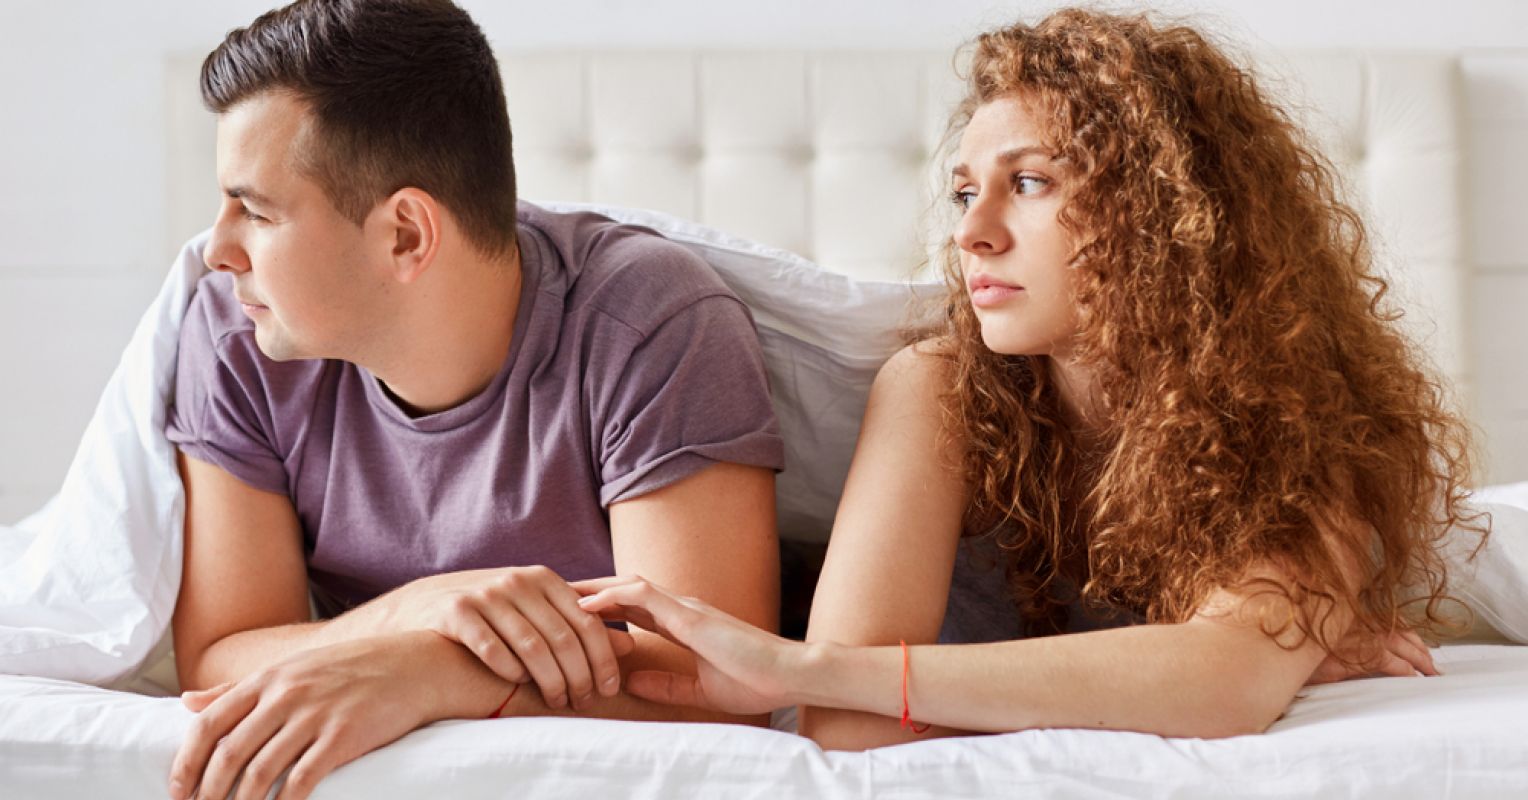 7 Key Reasons Why Some Women Cheat Psychology Today